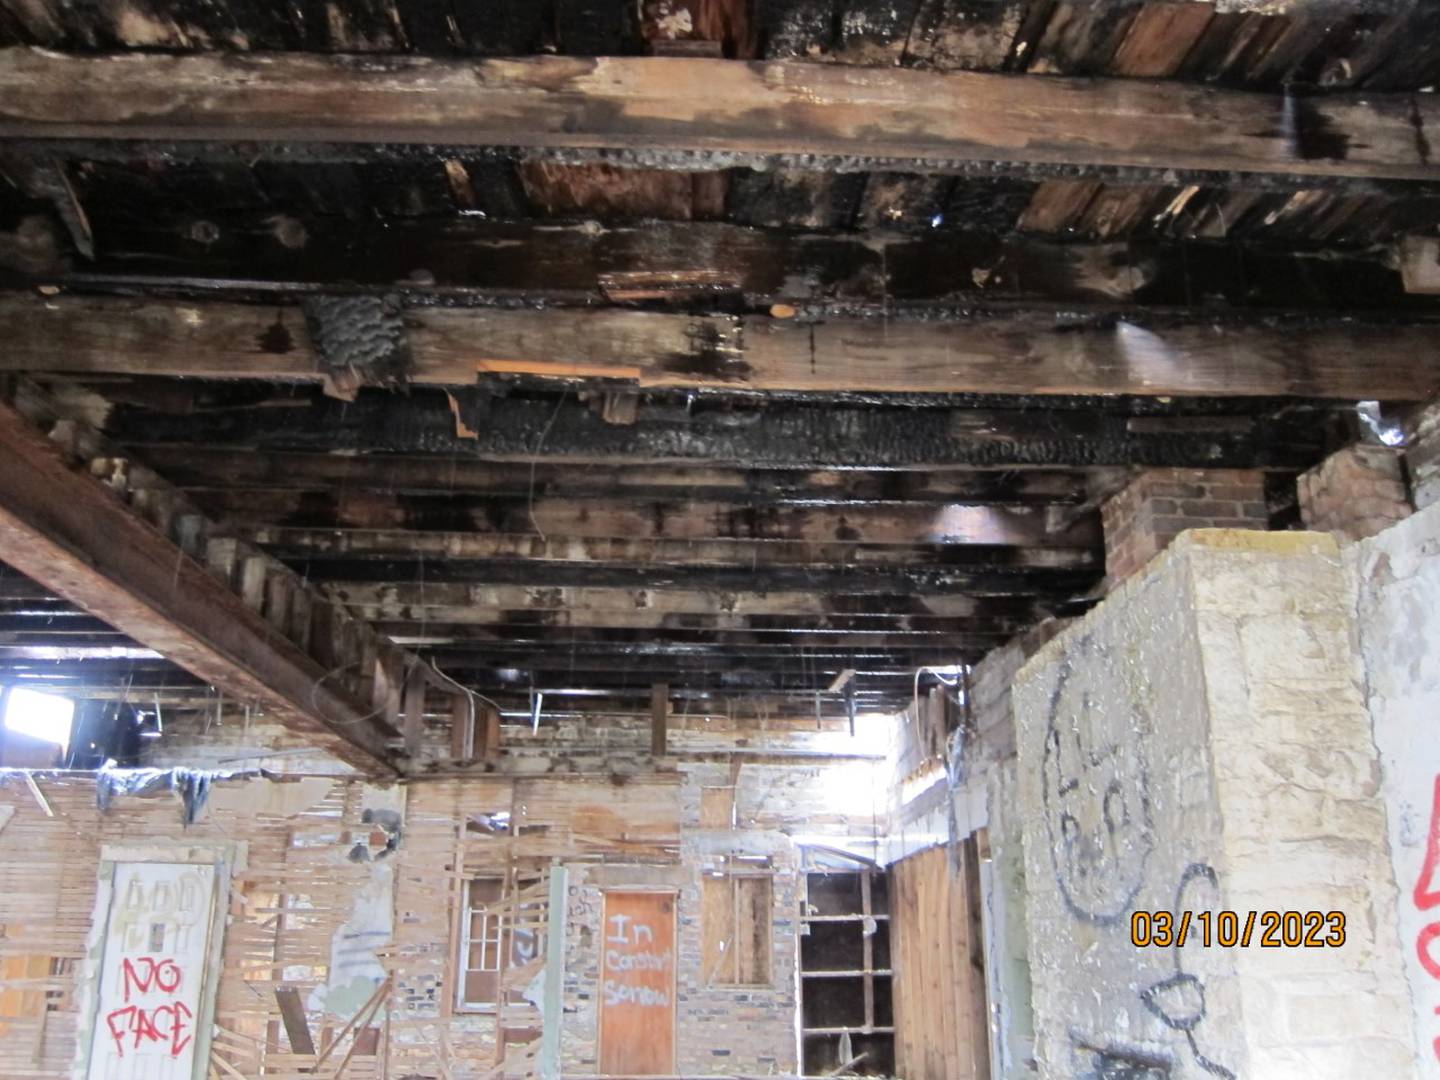 The inside of the circa 1843 limestone blacksmith shop at the former Mill Race property at 4 E. State St., Geneva, shows there had once been a fire that charred the roof. Photos of the building’s condition were presented Tuesday night at a public hearing before the Geneva Historic Preservation Commission. A decision on allowing its demolition is still pending.